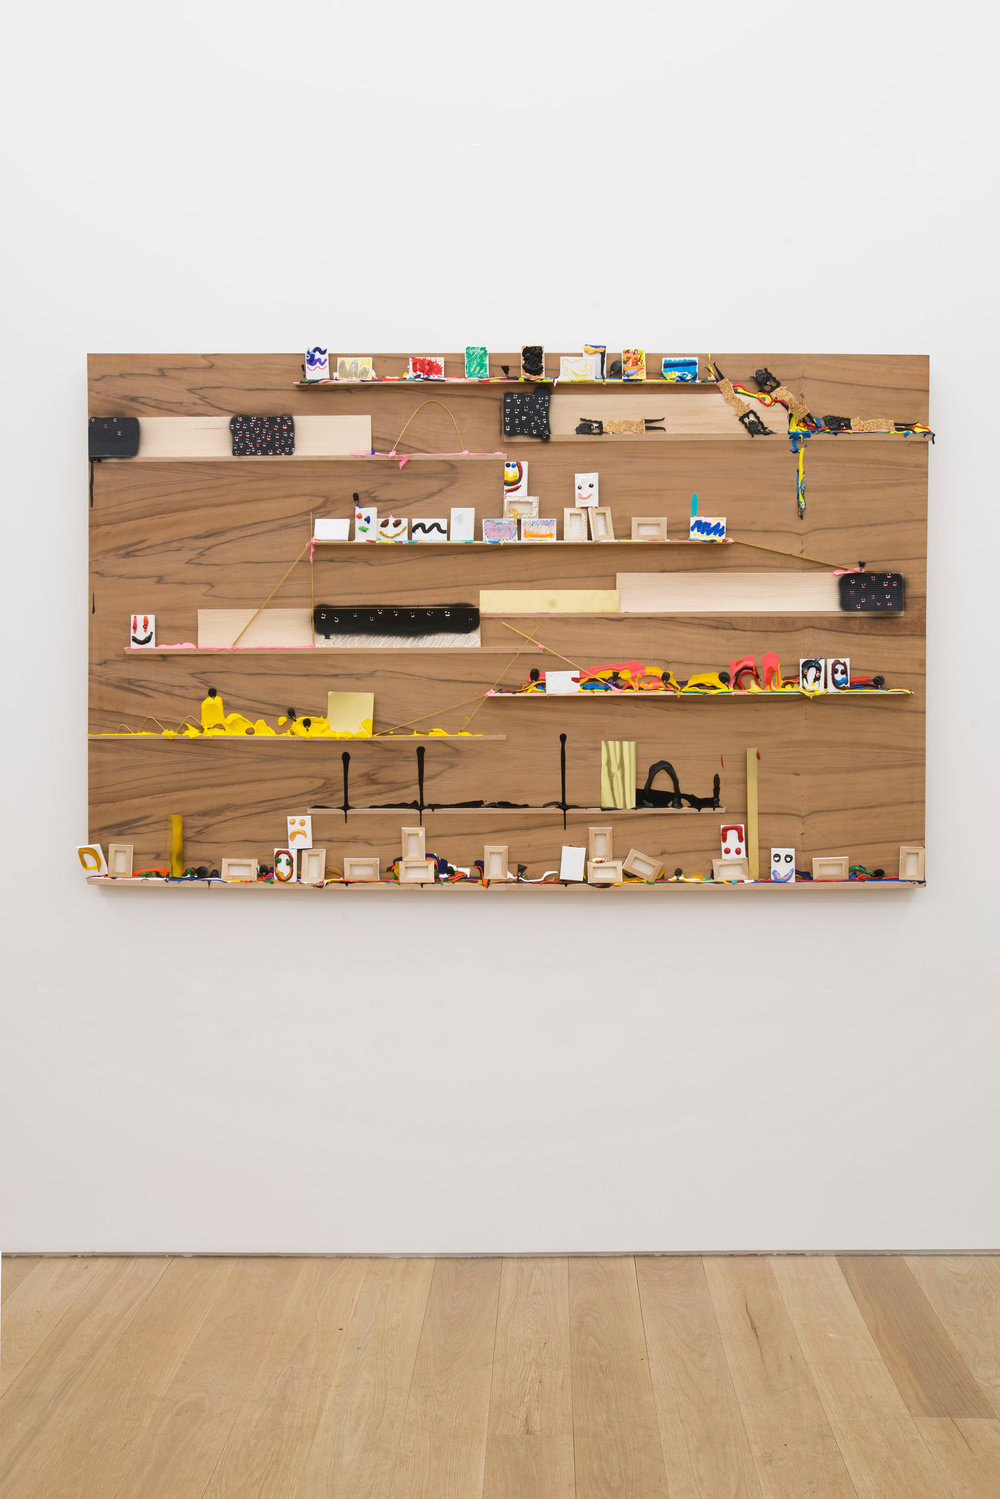 Devin troy strother, i just landed in rome, 2013, marlborough broome street, installation view 10